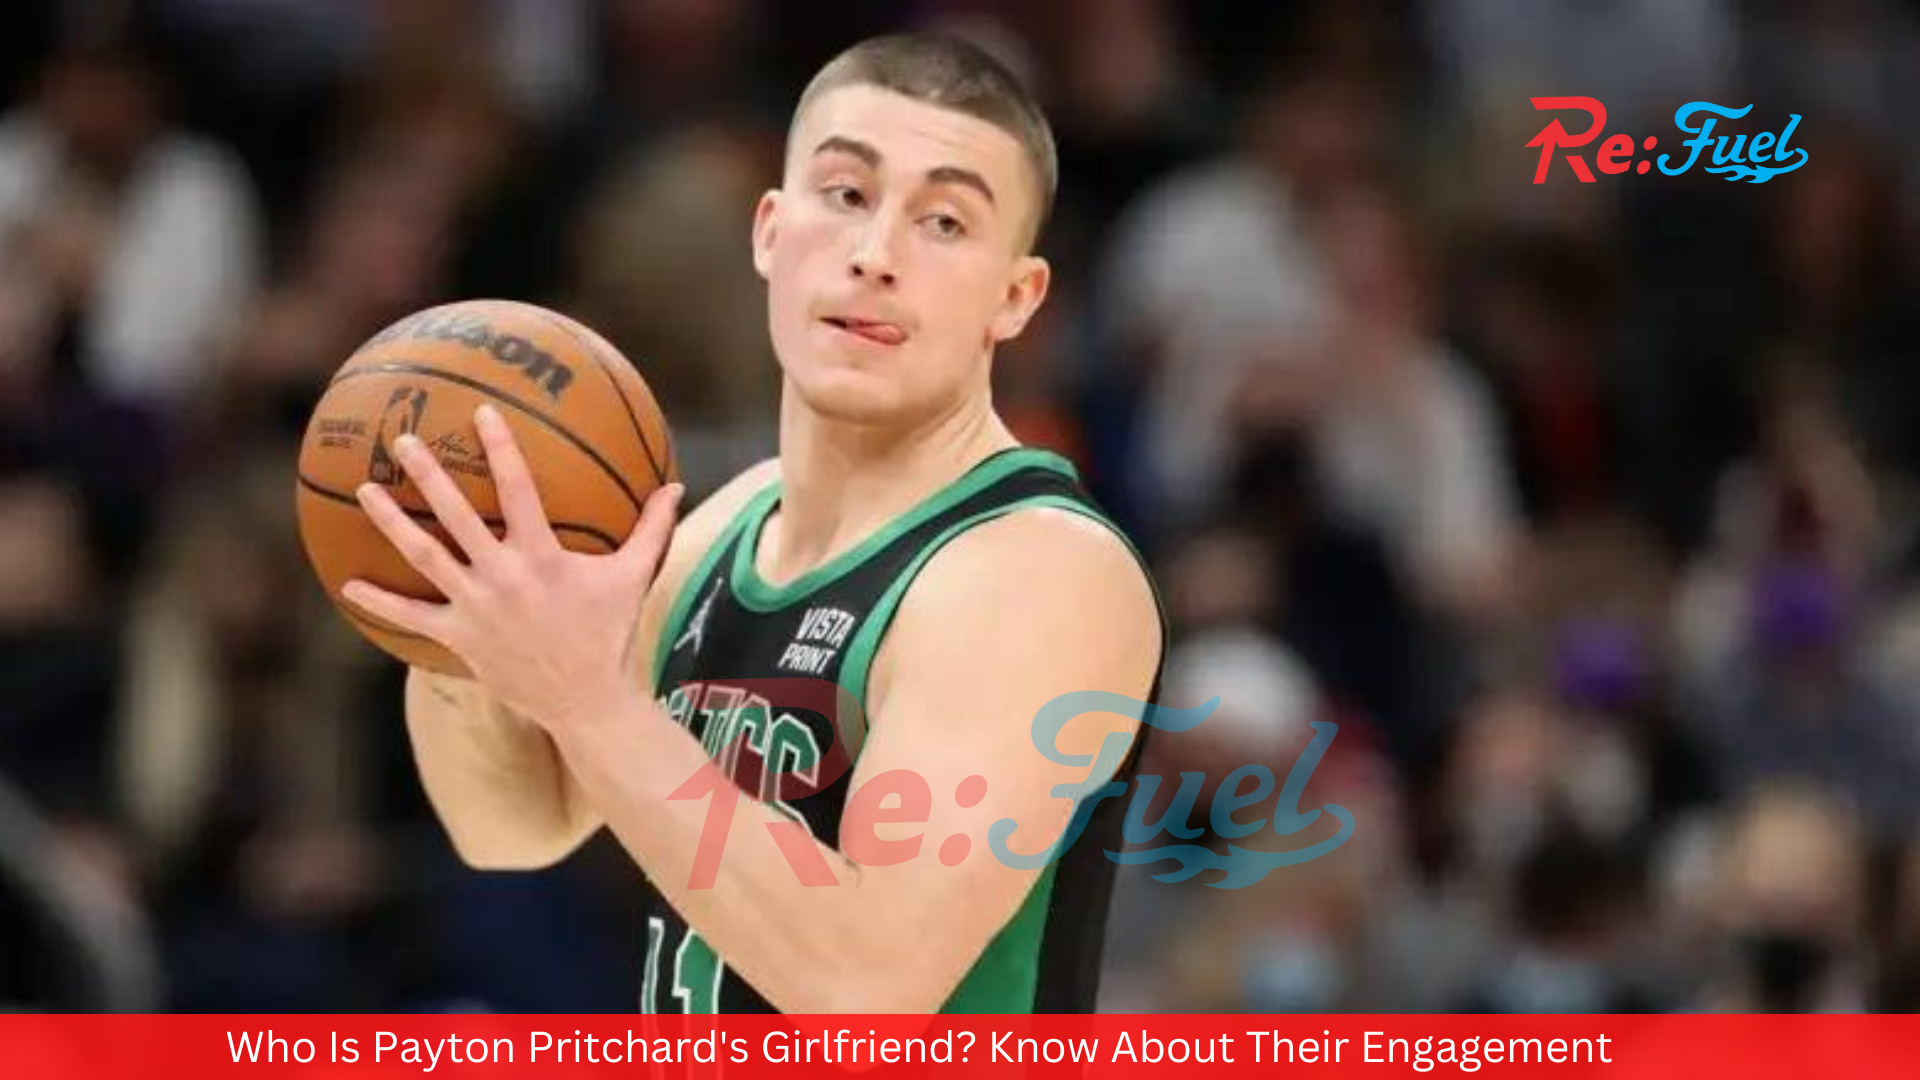 Who Is Payton Pritchard's Girlfriend? Know About Their Engagement